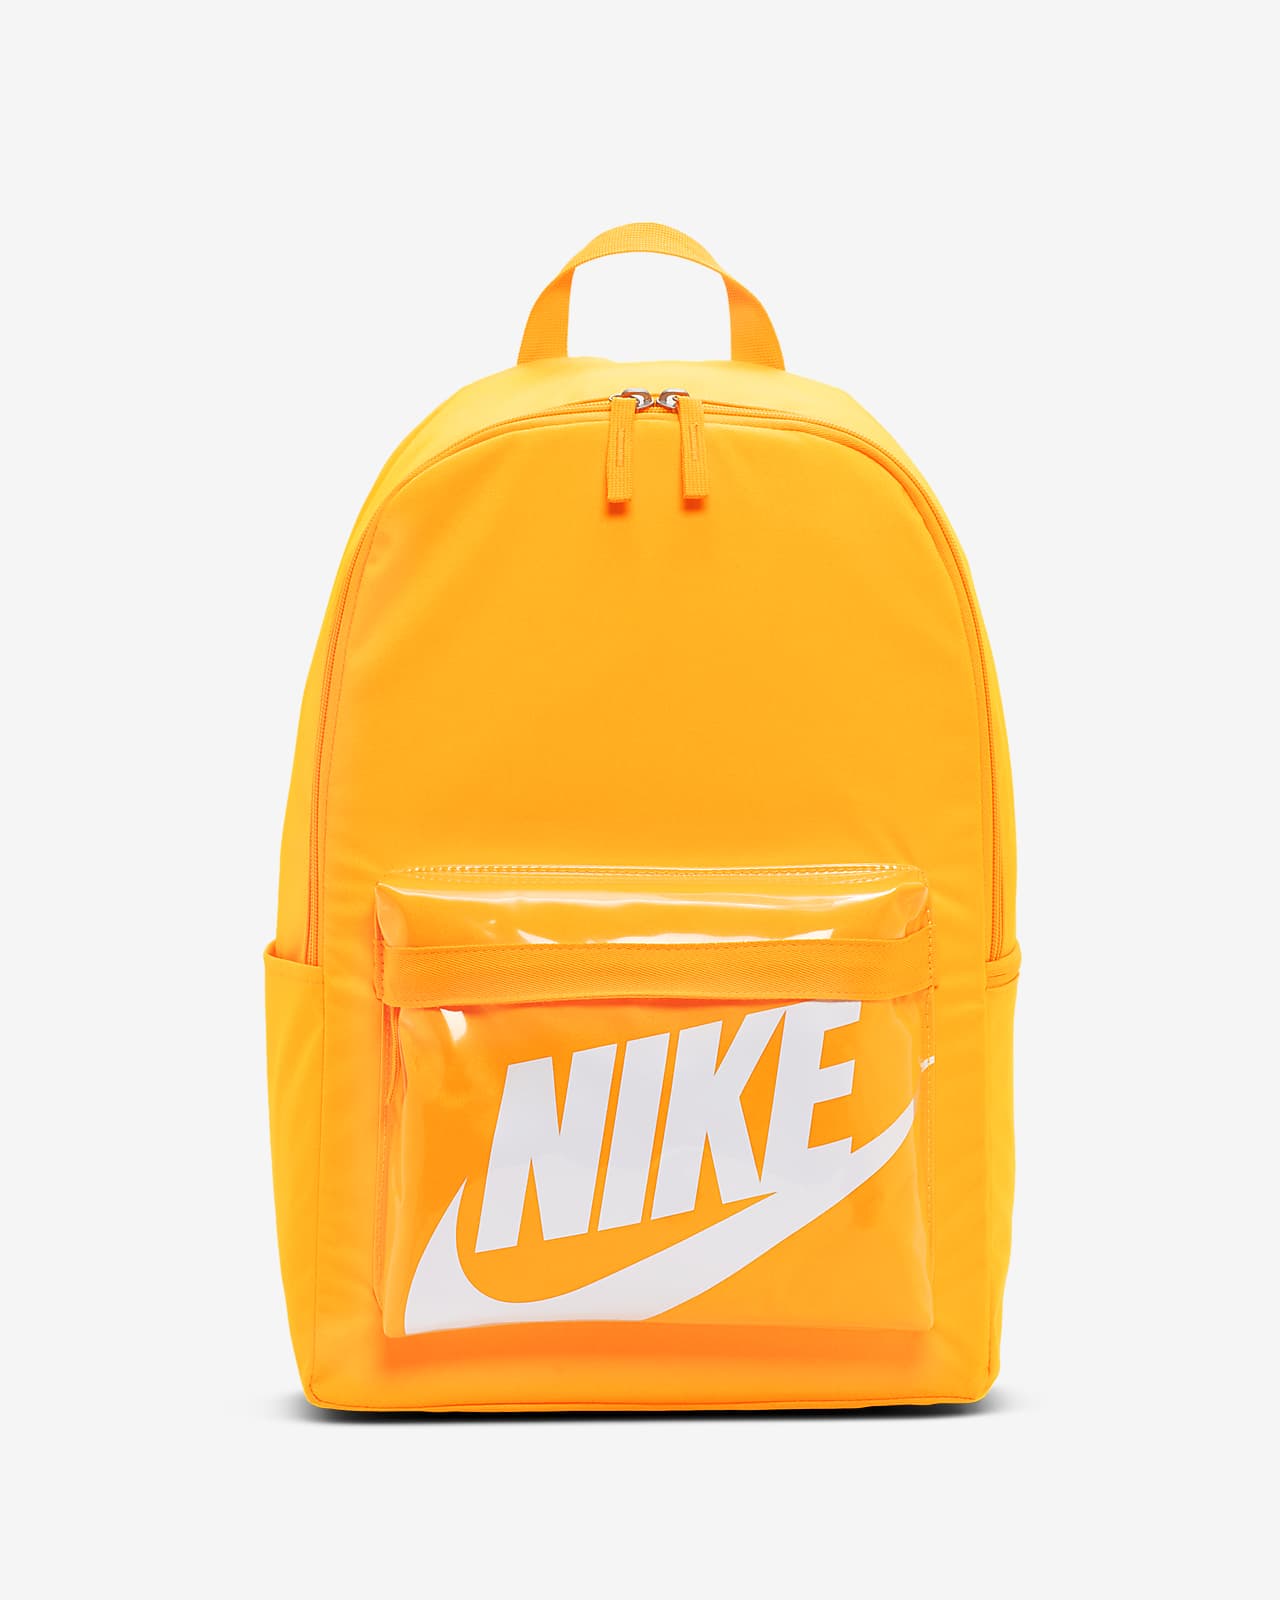 nike bags india official website